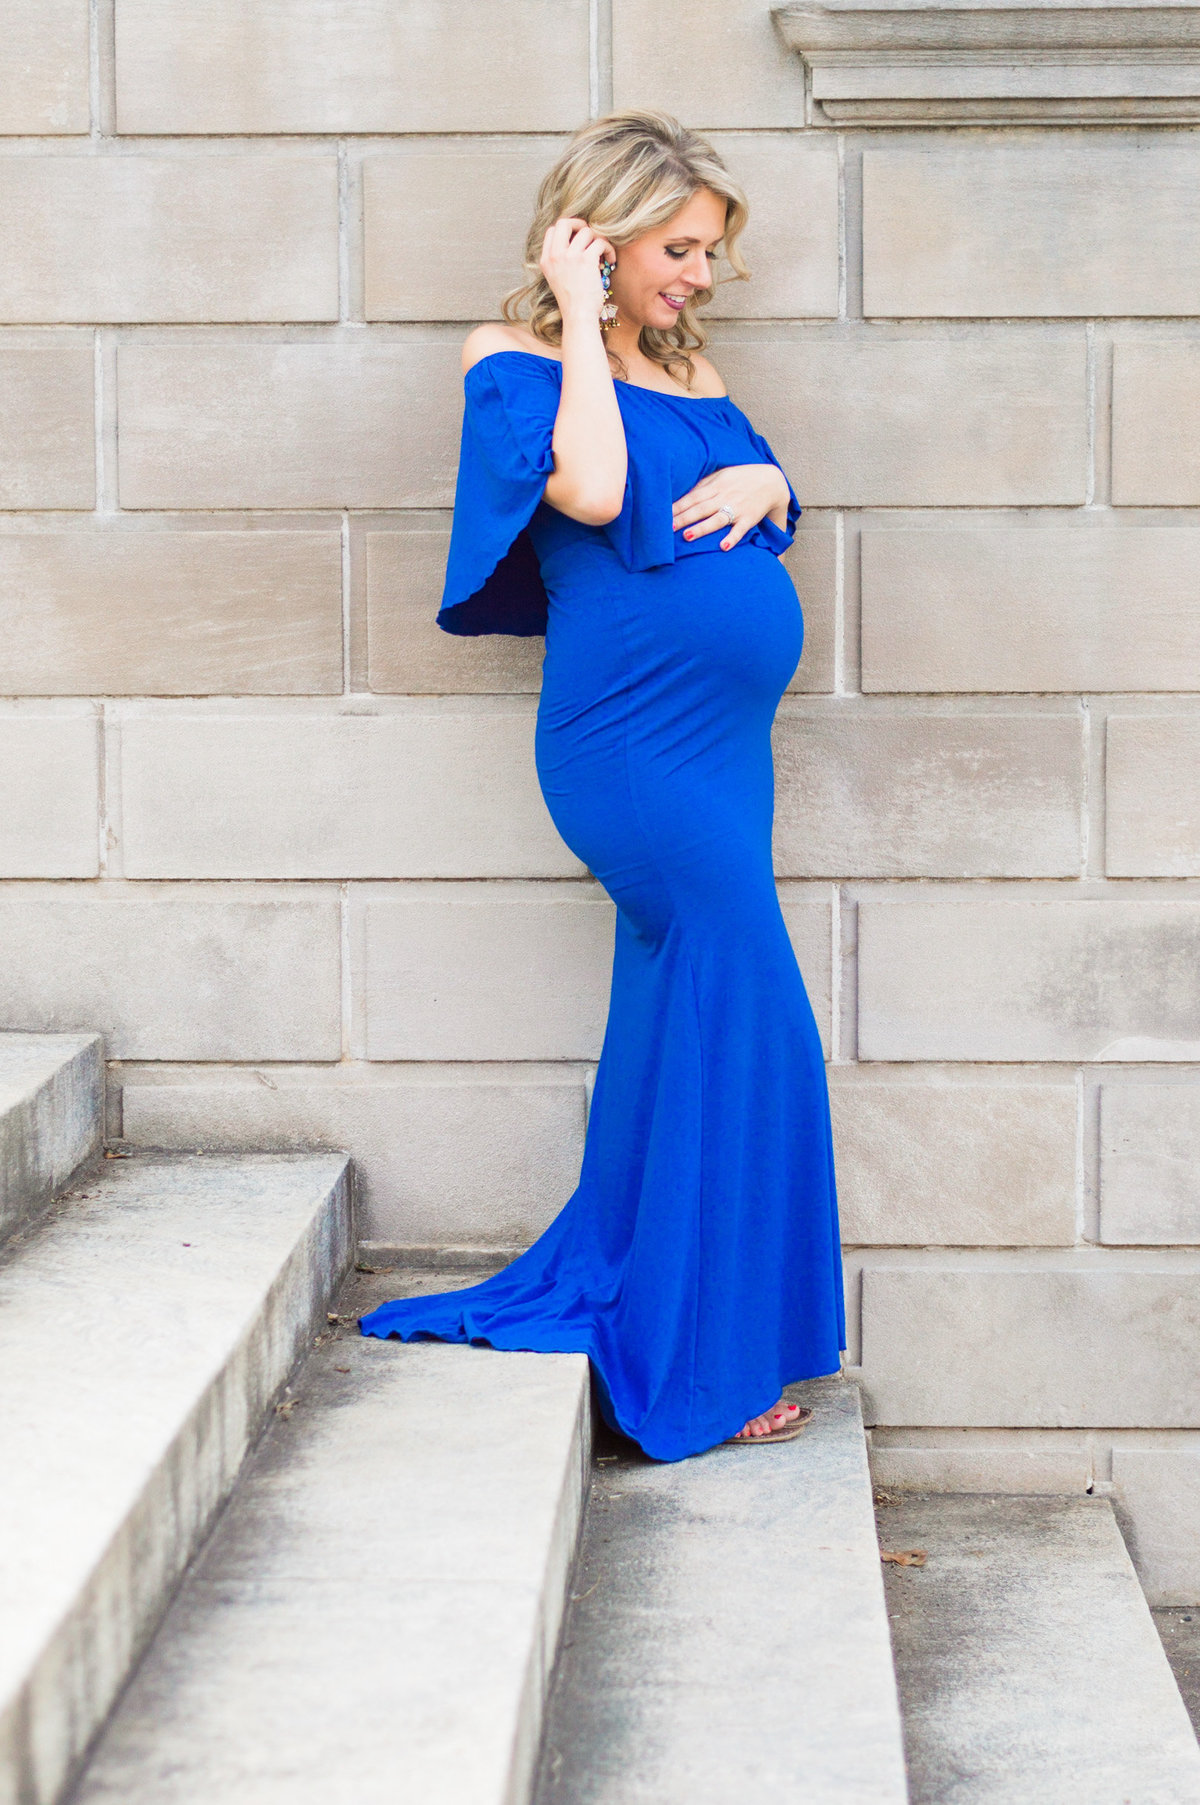 Downtown_Maternity_Session_Lifestyle_Anniversary_Photography_Lynchburg_Virginia_photographer-6